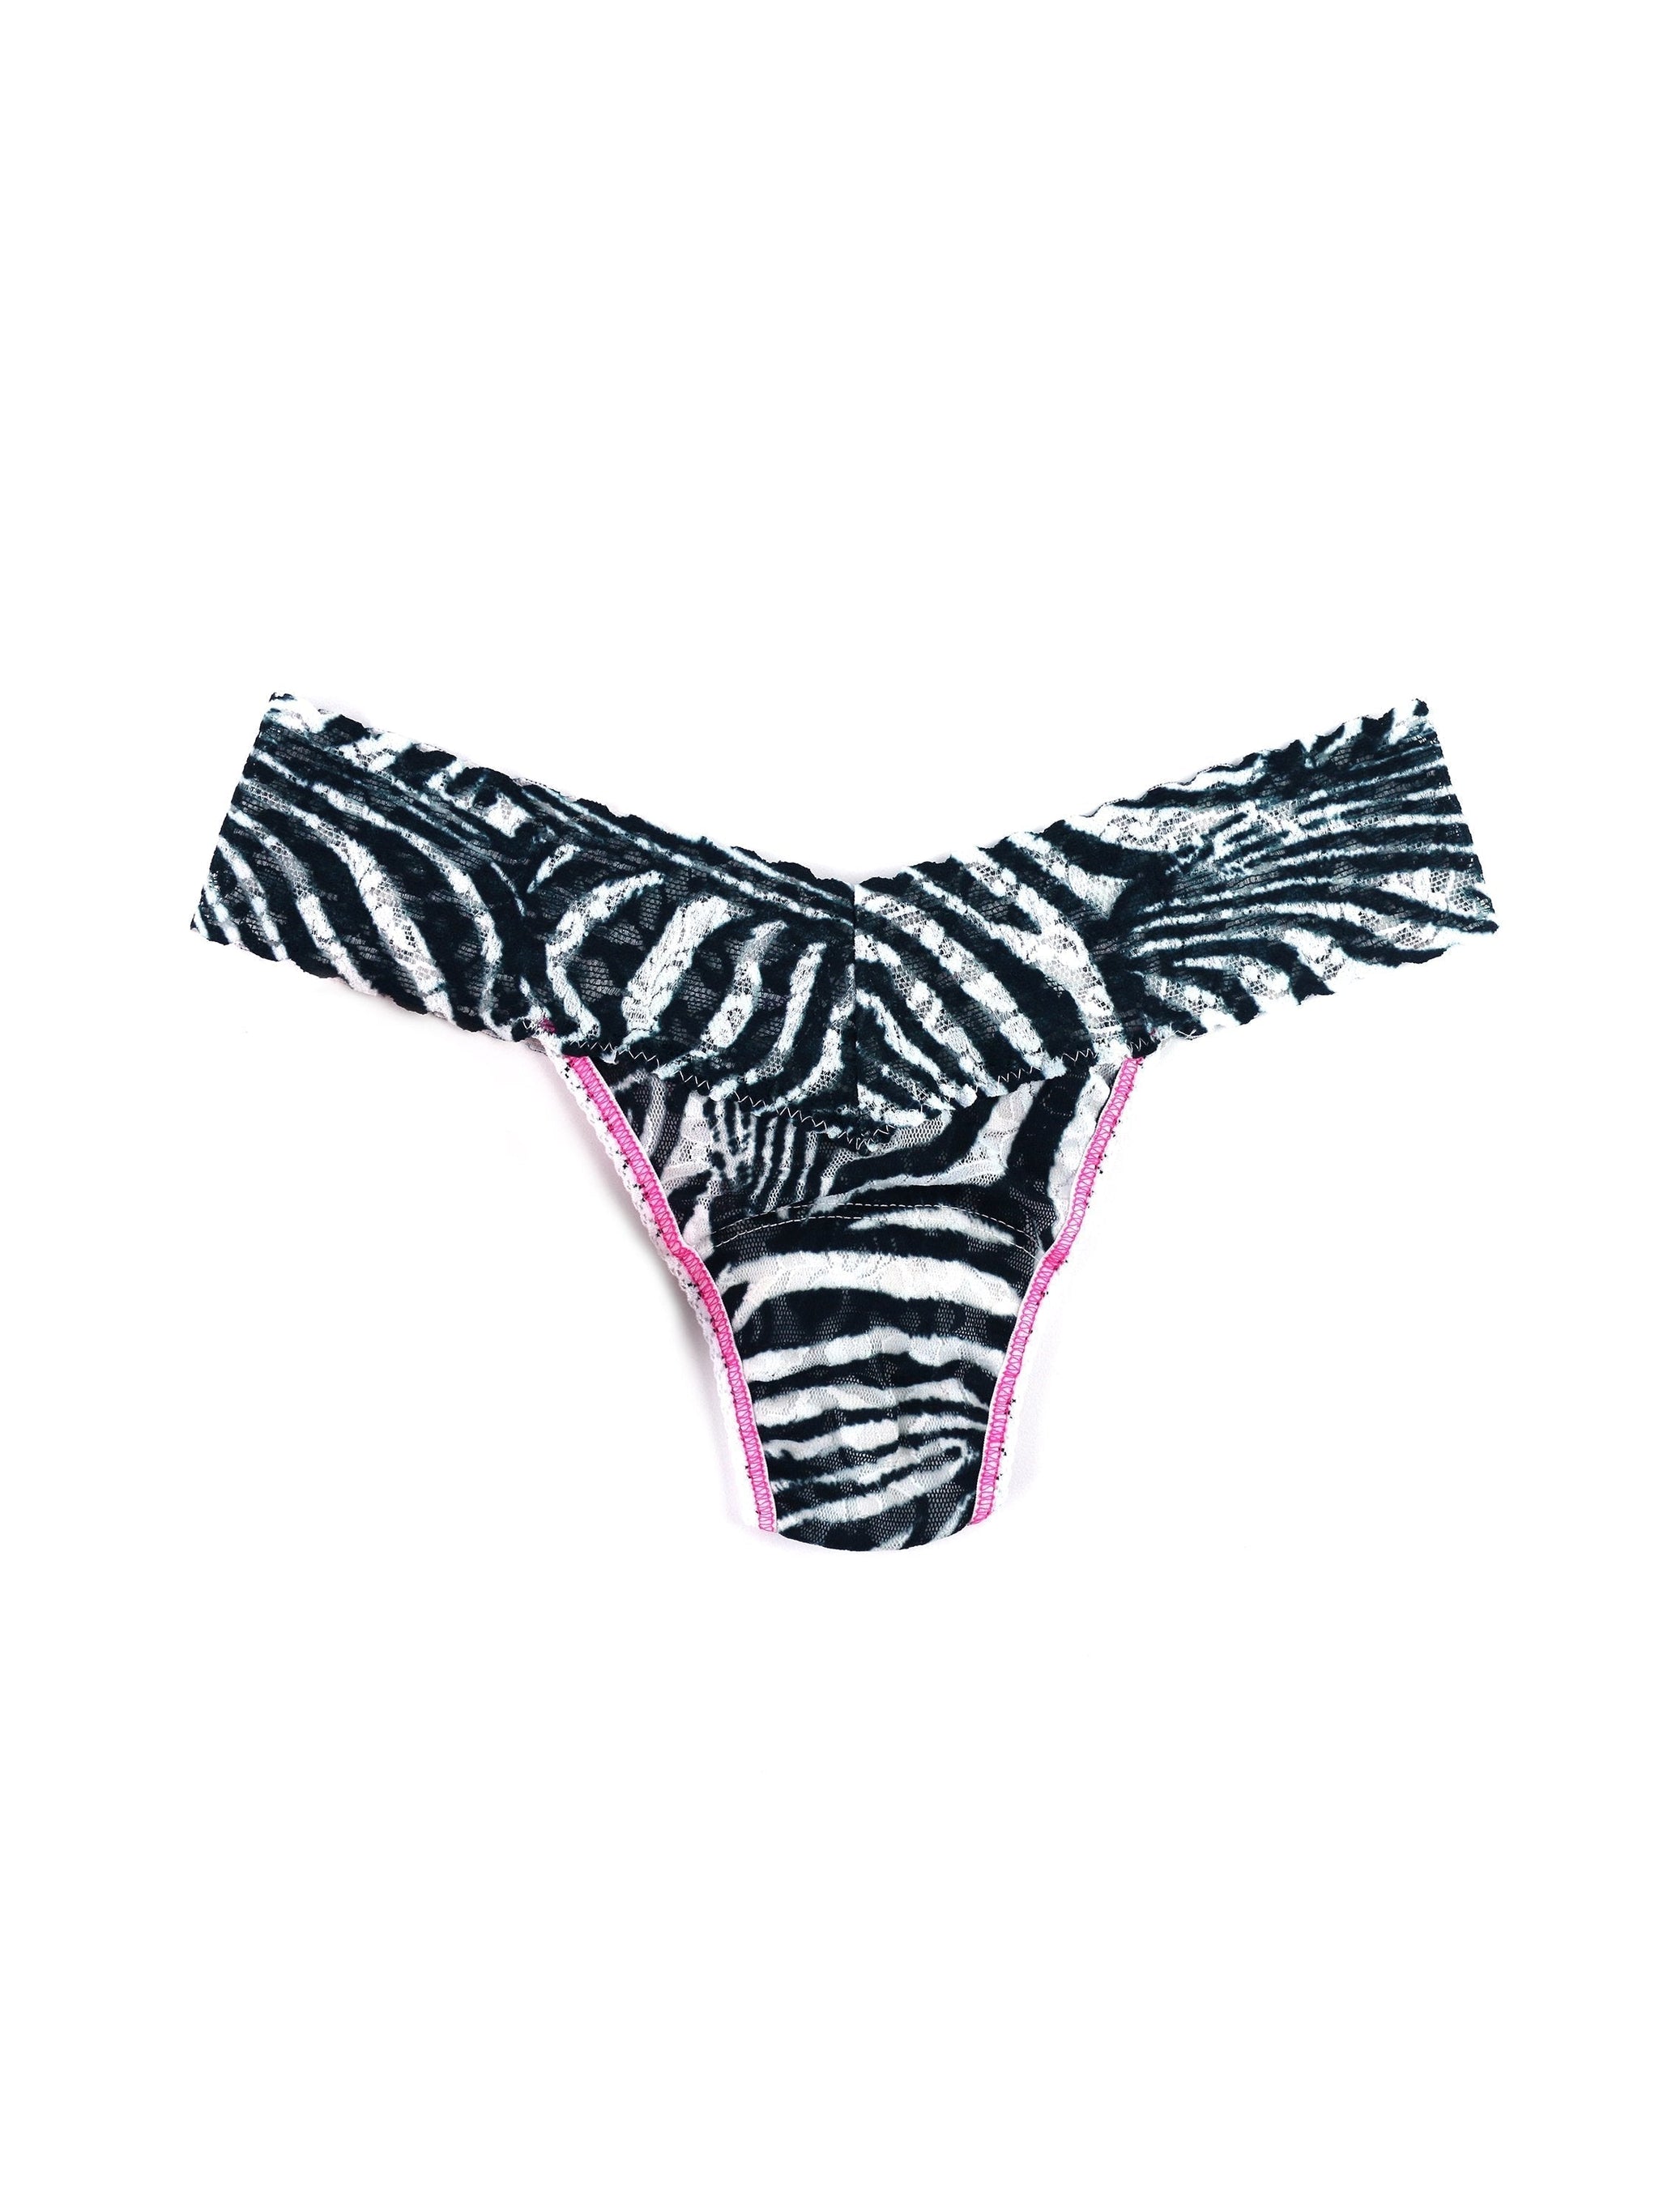 Petite Size Printed Signature Lace Thong Aughts Zebra Sale